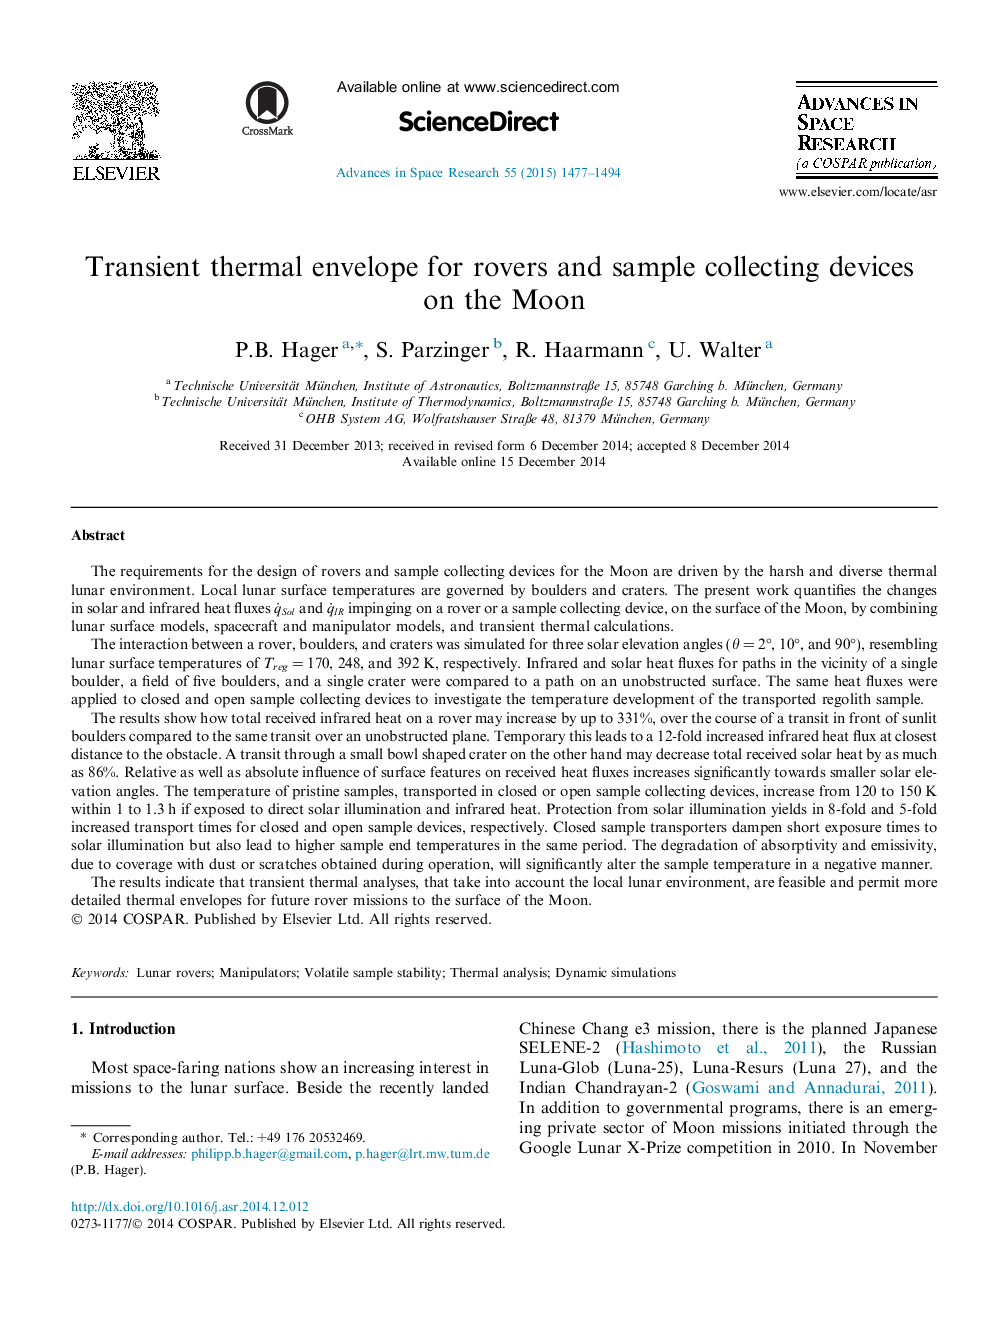 Transient thermal envelope for rovers and sample collecting devices on the Moon